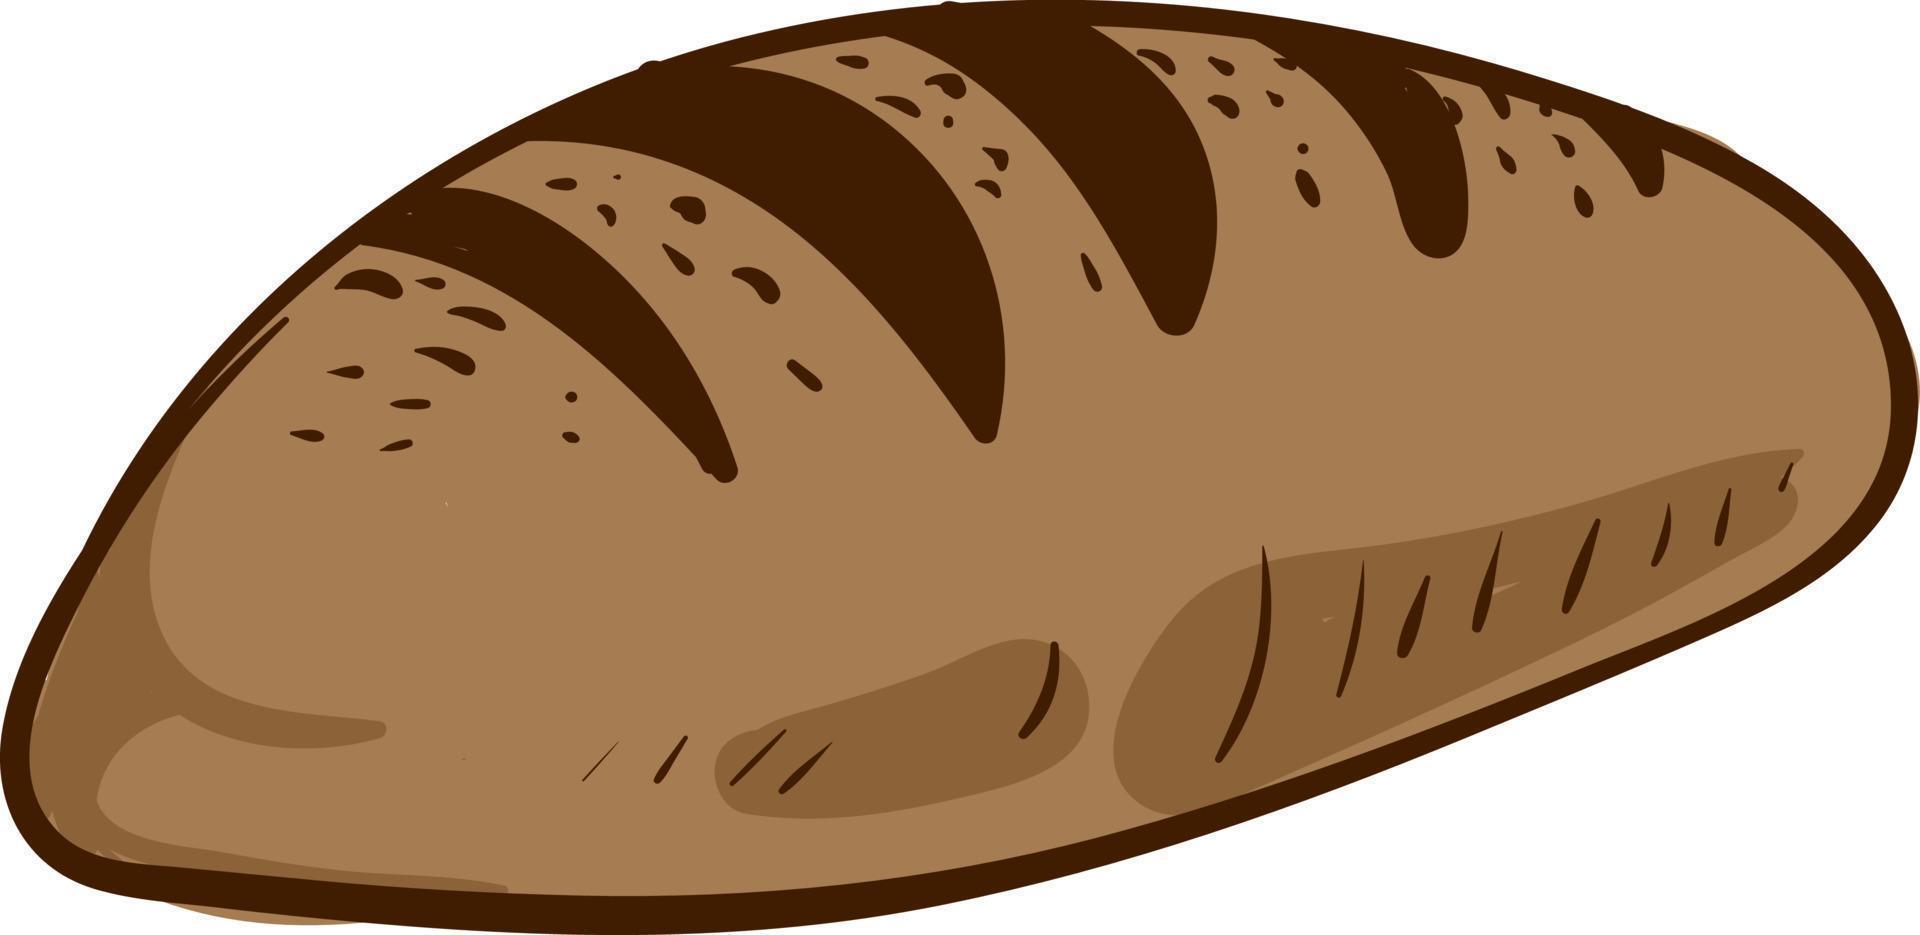 Brown bread, illustration, vector on white background